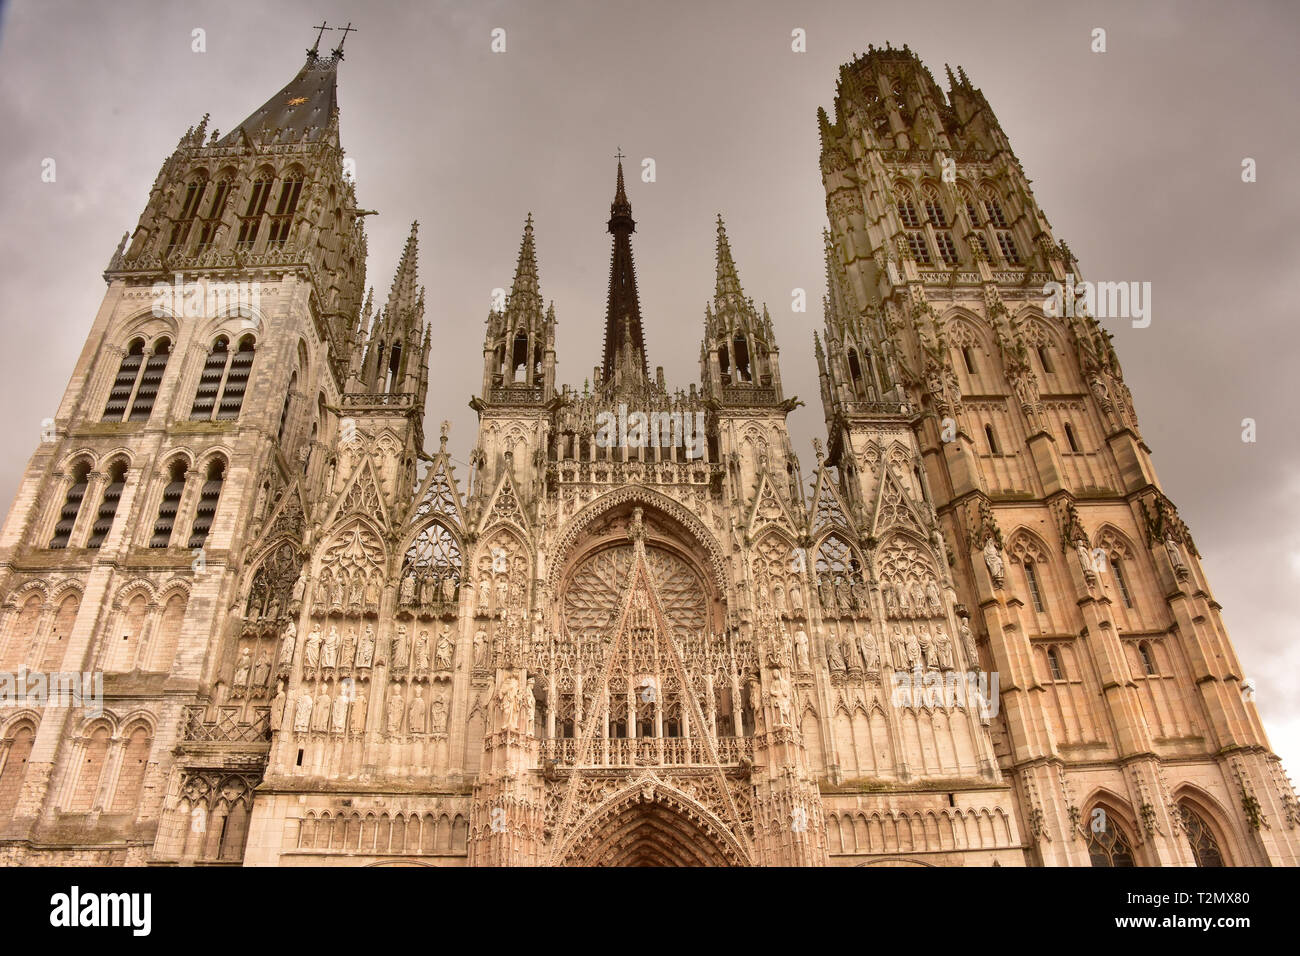 Exterior of Rouen Cathedral, Rouen, Normandy, France Stock Photo